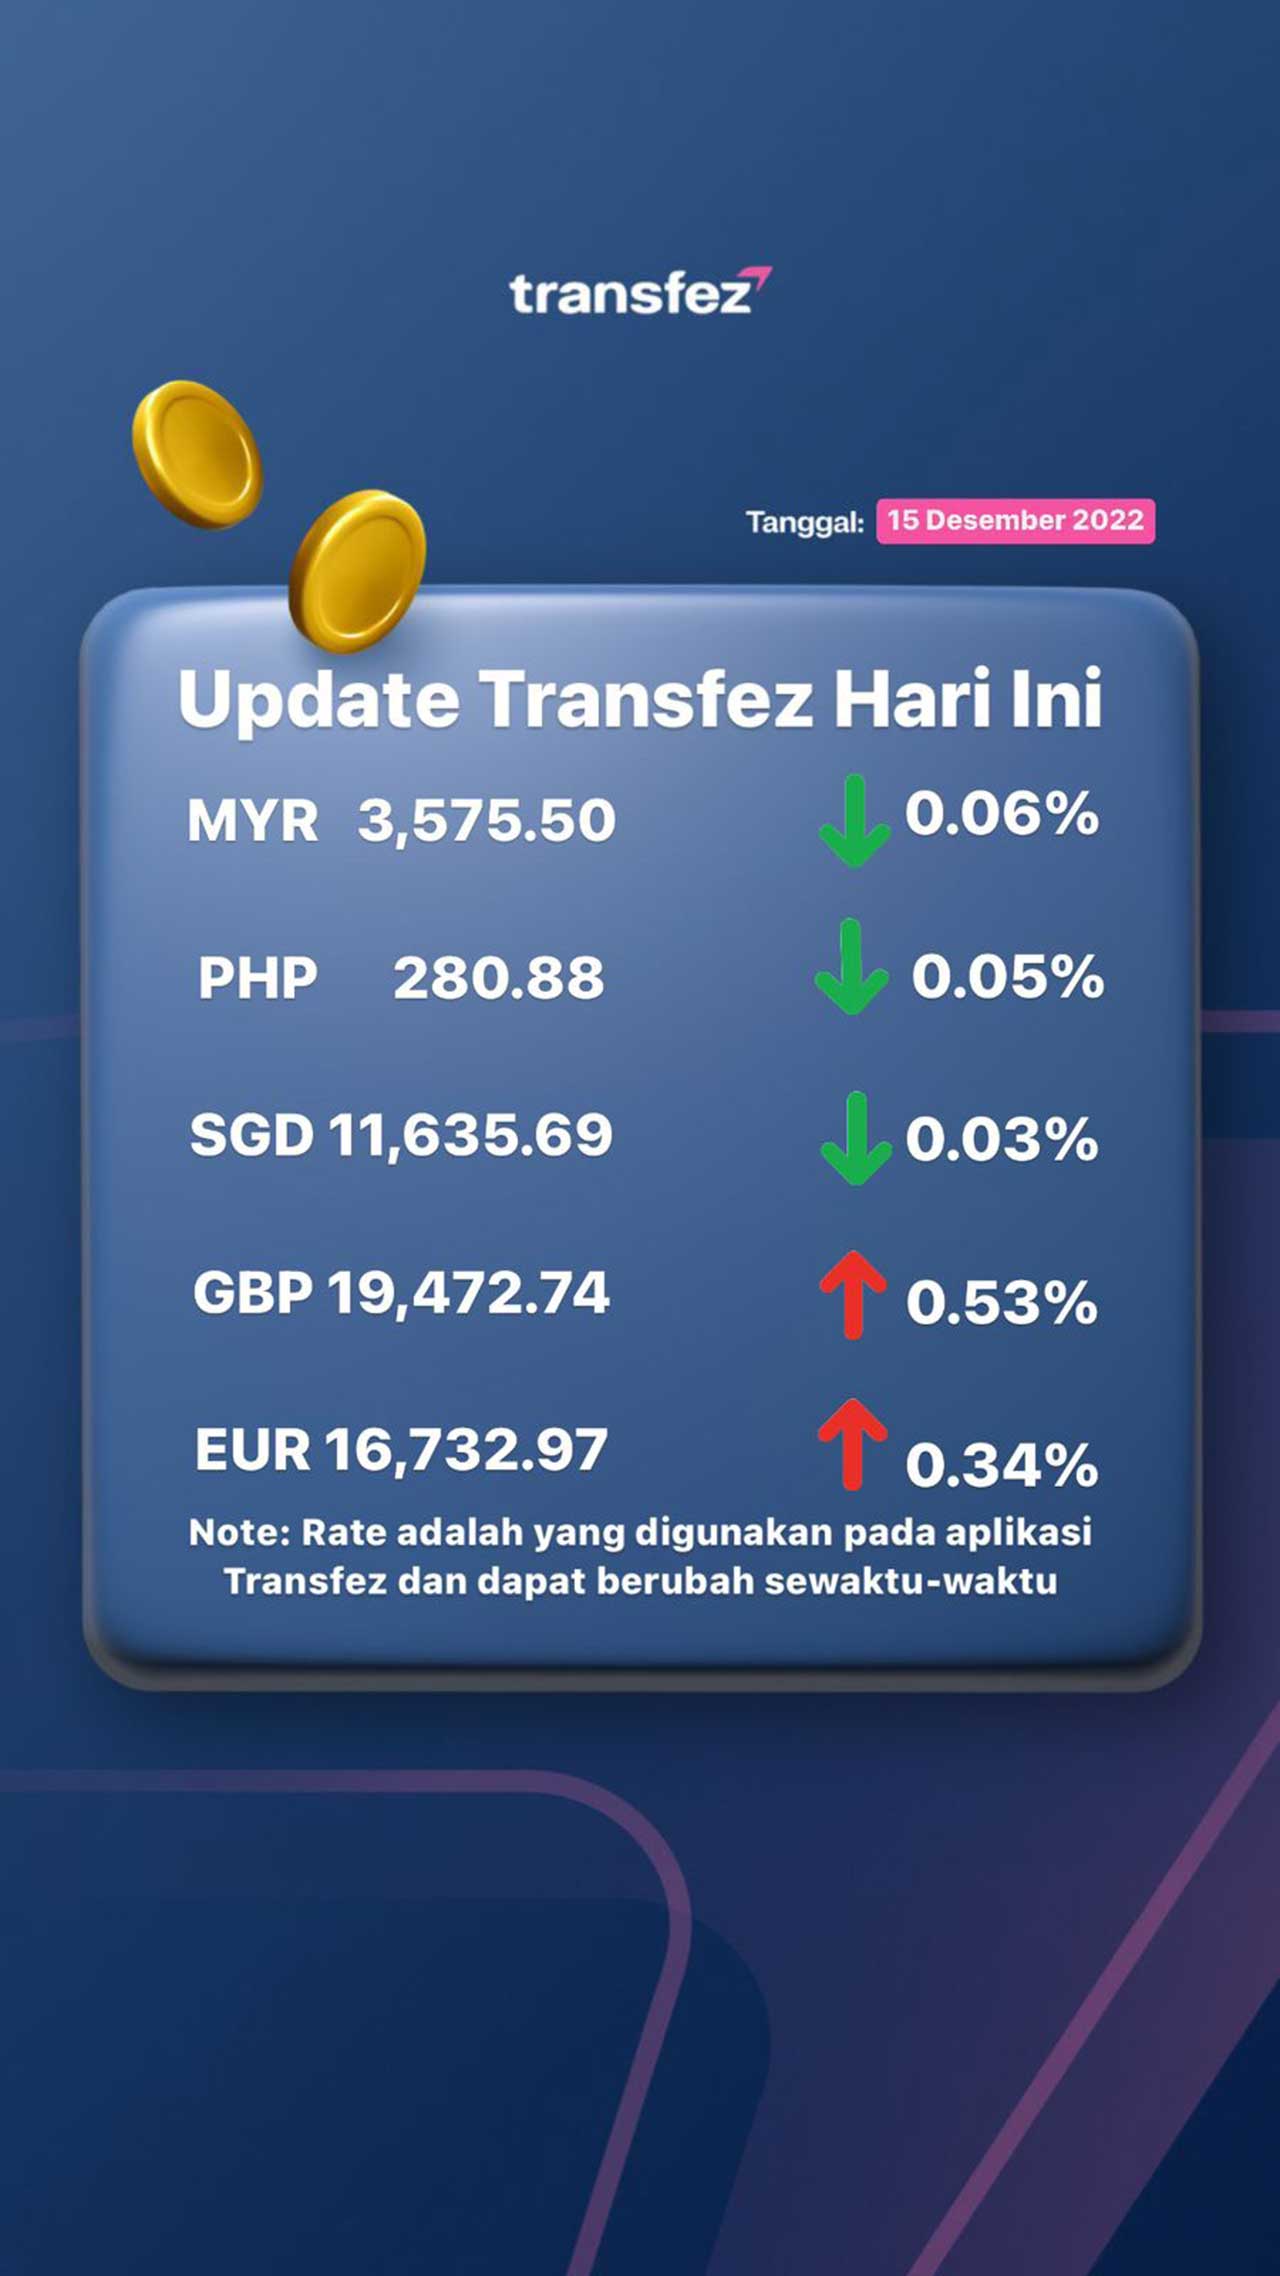 Today's Transfez Rate Update 15 December 2022